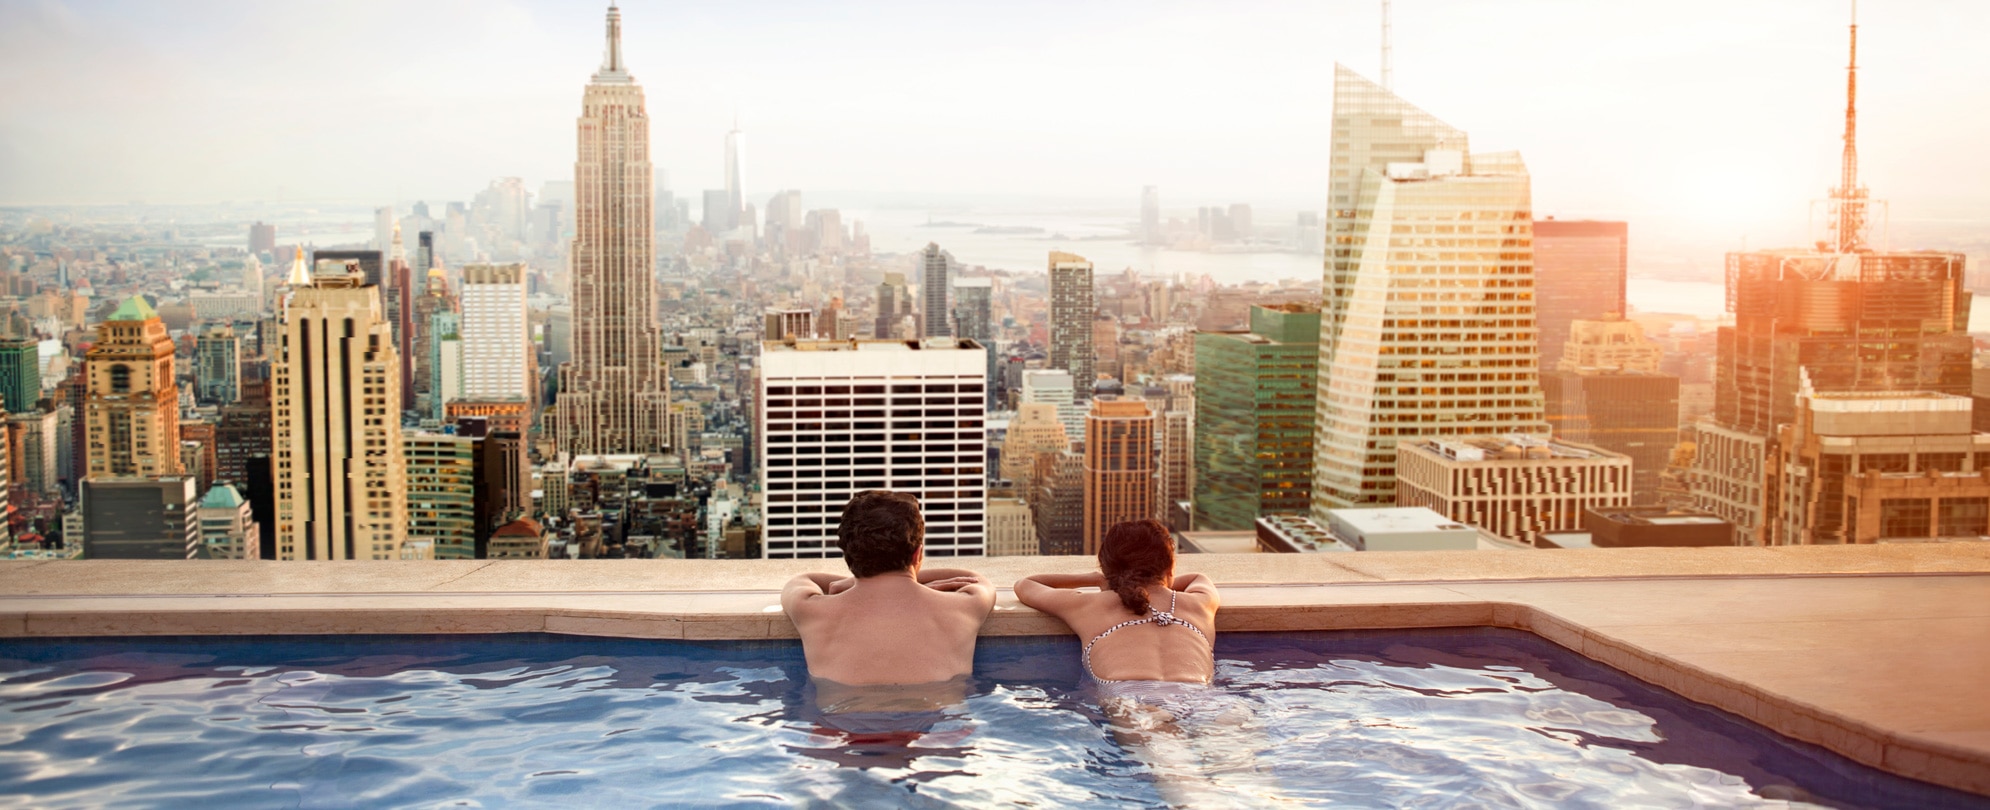 Couple leaning on the edge of an infinity pool overlooking city views 